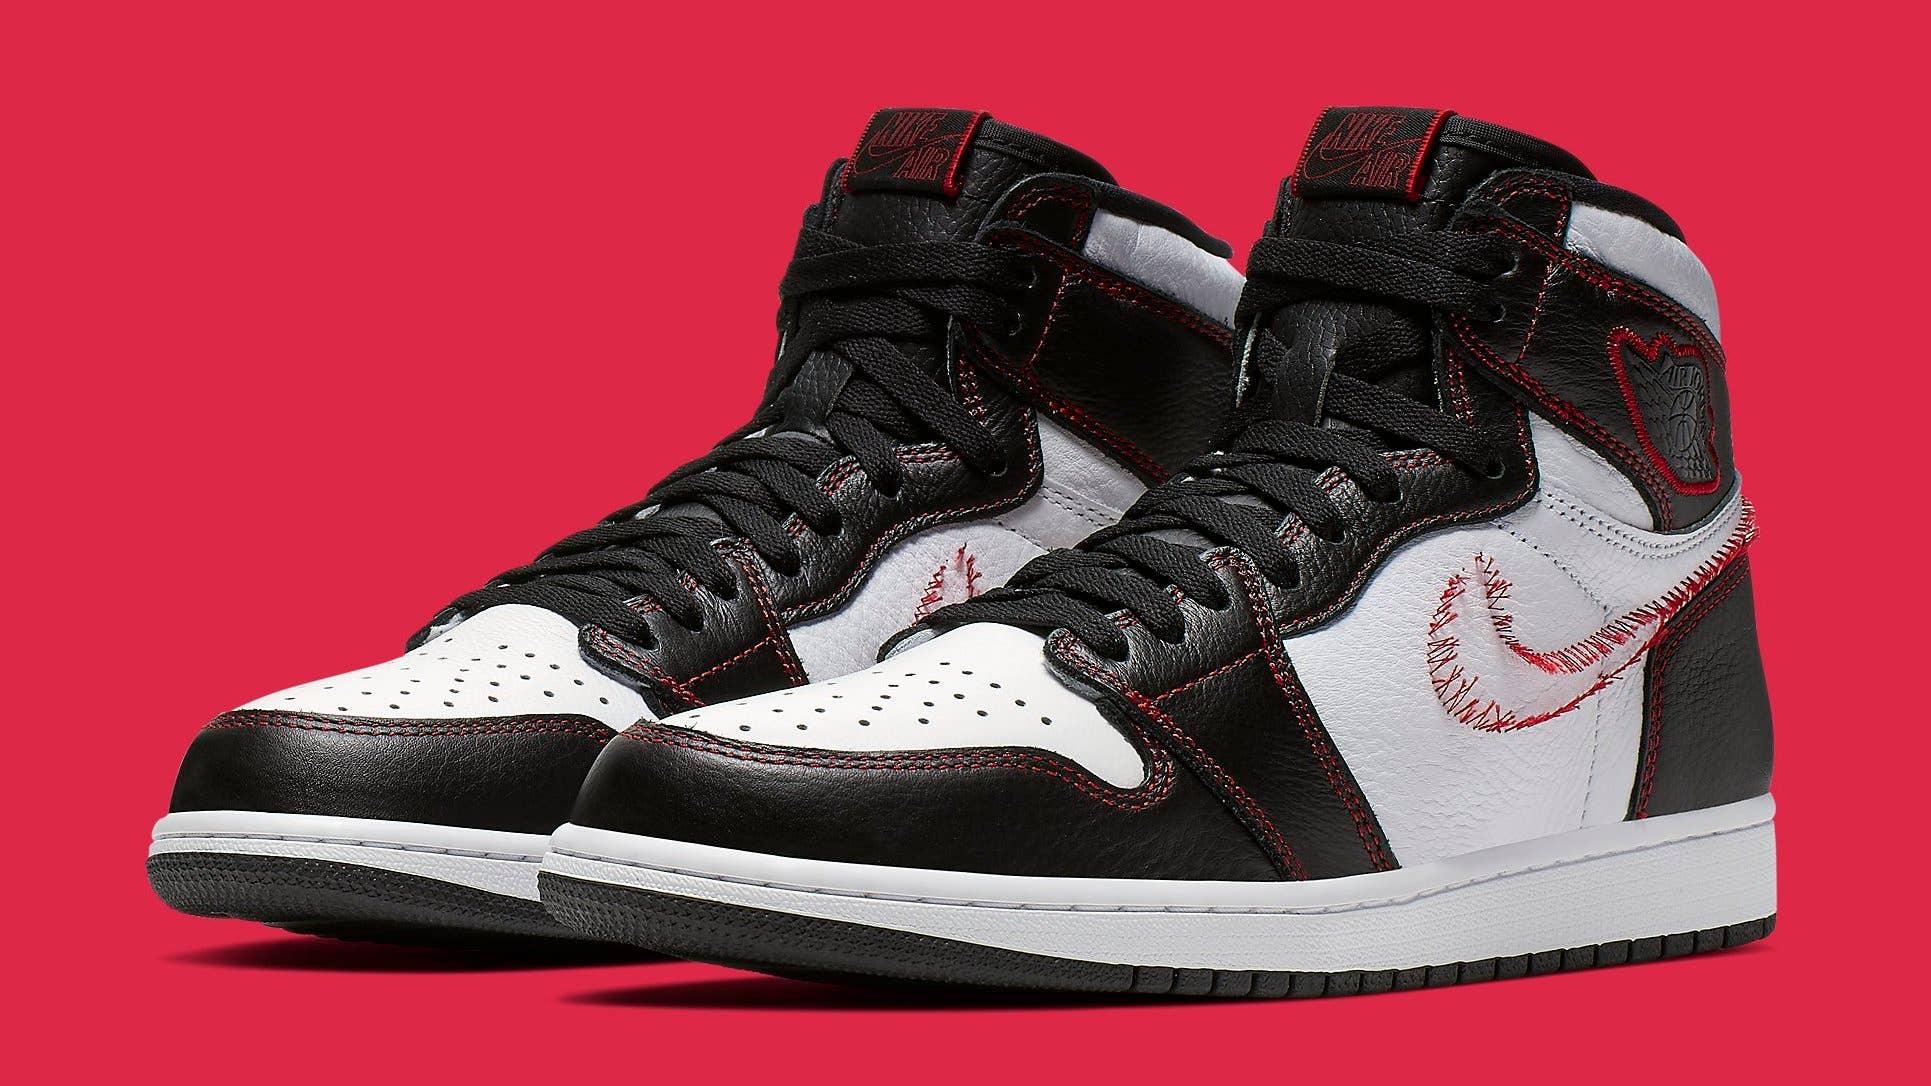 Nike Announces Official Release Date for Air Jordan 1 and Nike SB